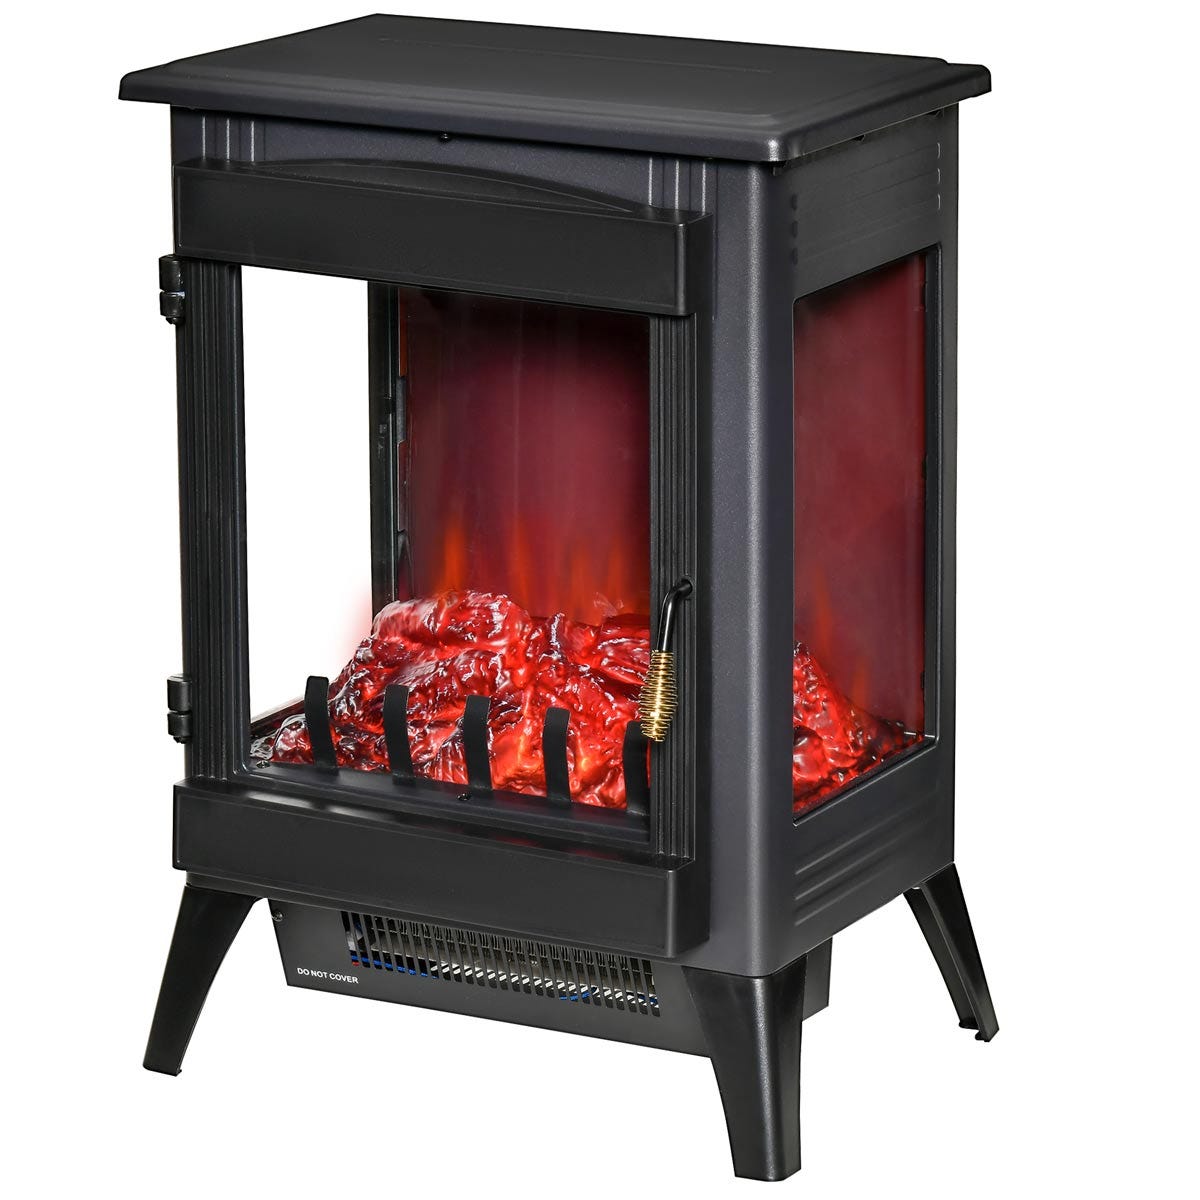 Etna 2kW Freestanding Electric Fireplace Stove with LED Flame Effect - Black